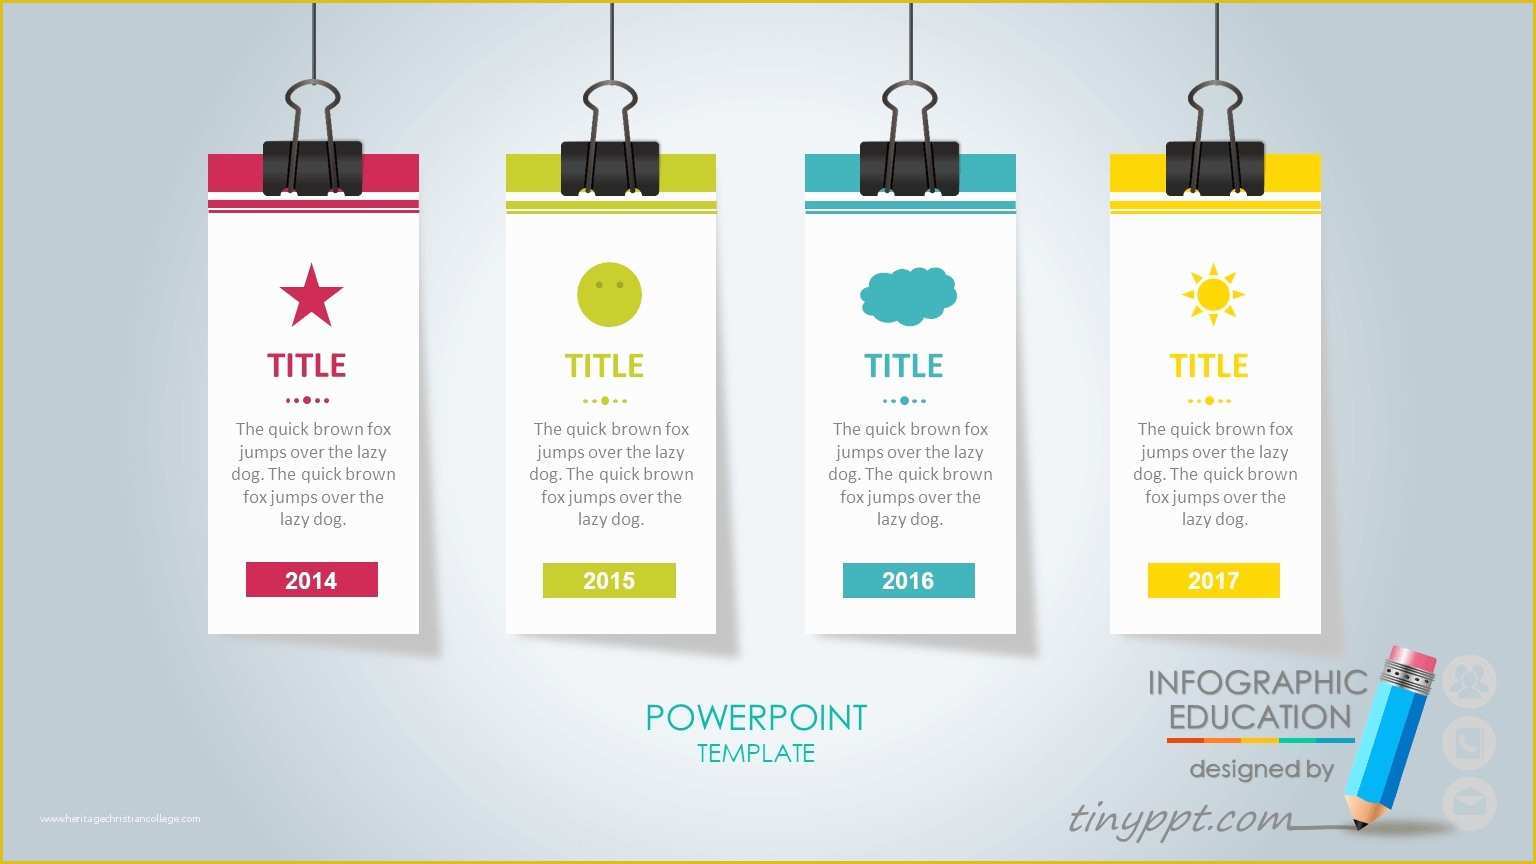 Powerpoint Templates Free Download 2018 Of Template Powerpoint Free Download 2016